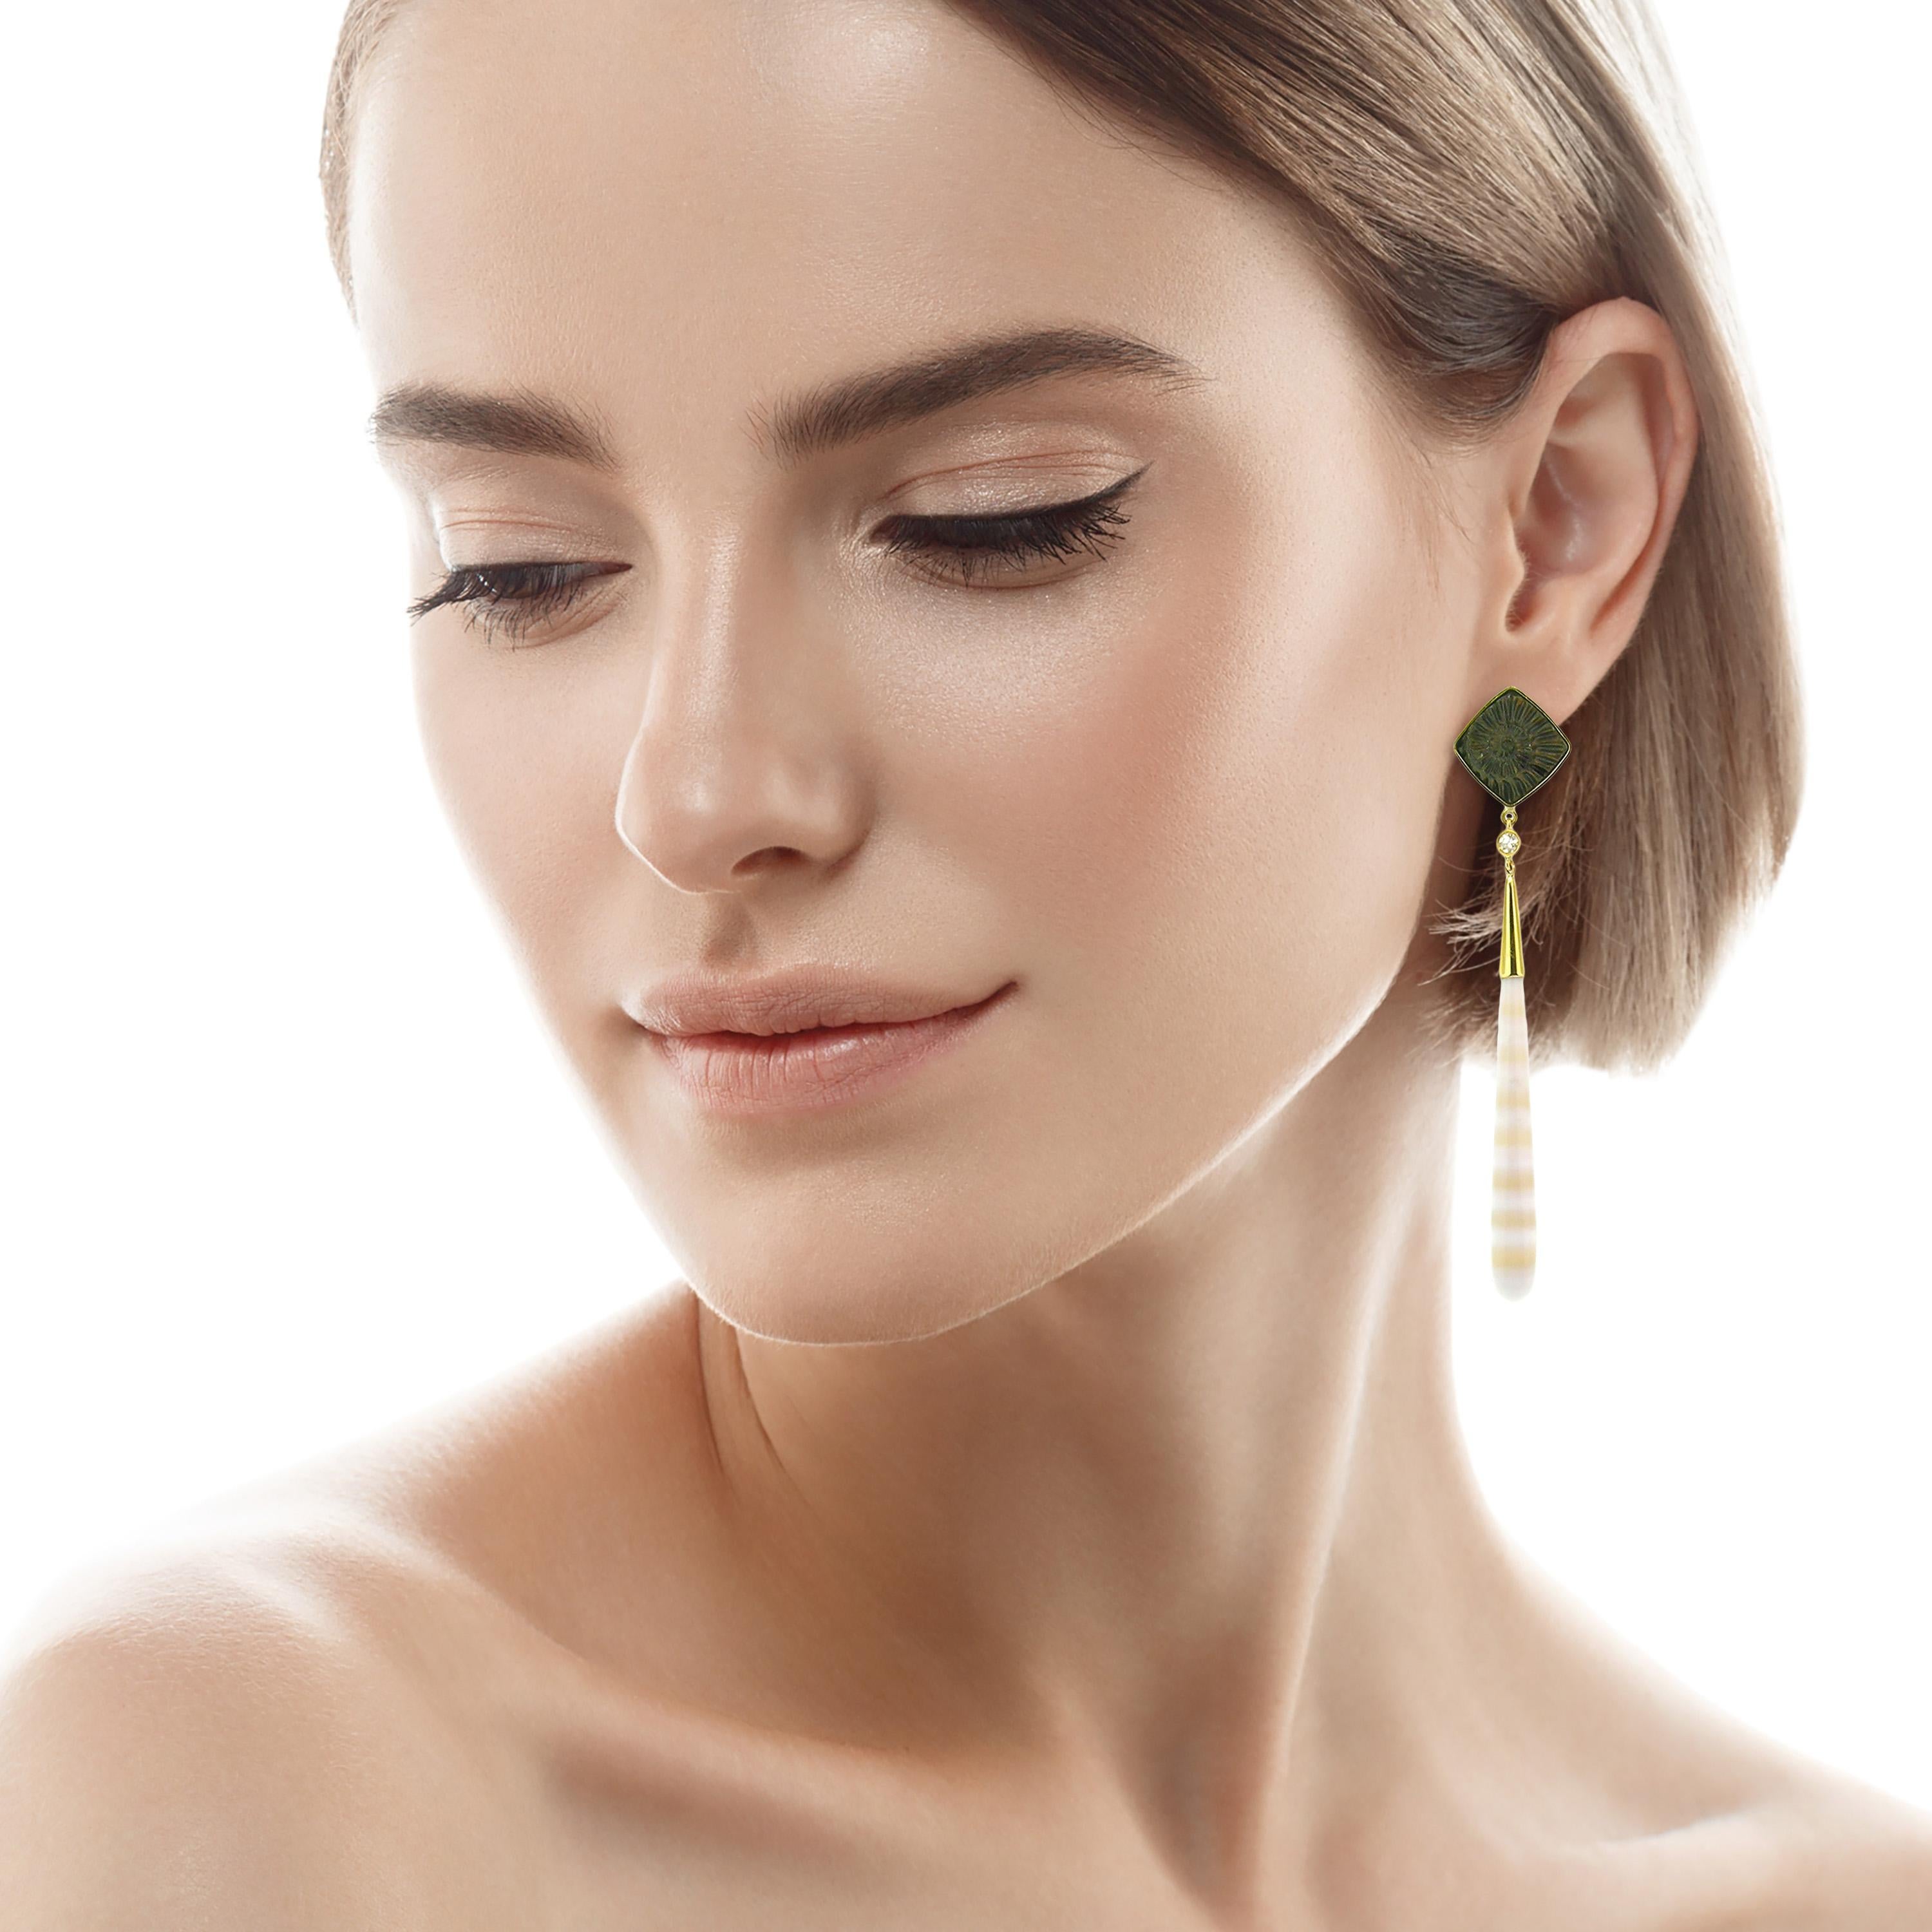 These sophisticated earrings feature fossil imprints of ancient ammonites, which have mineralized into pyrite. The drops are German-carved agate with alternating bands of creamy white and translucent peach. The rich bronze color of the pyrite and